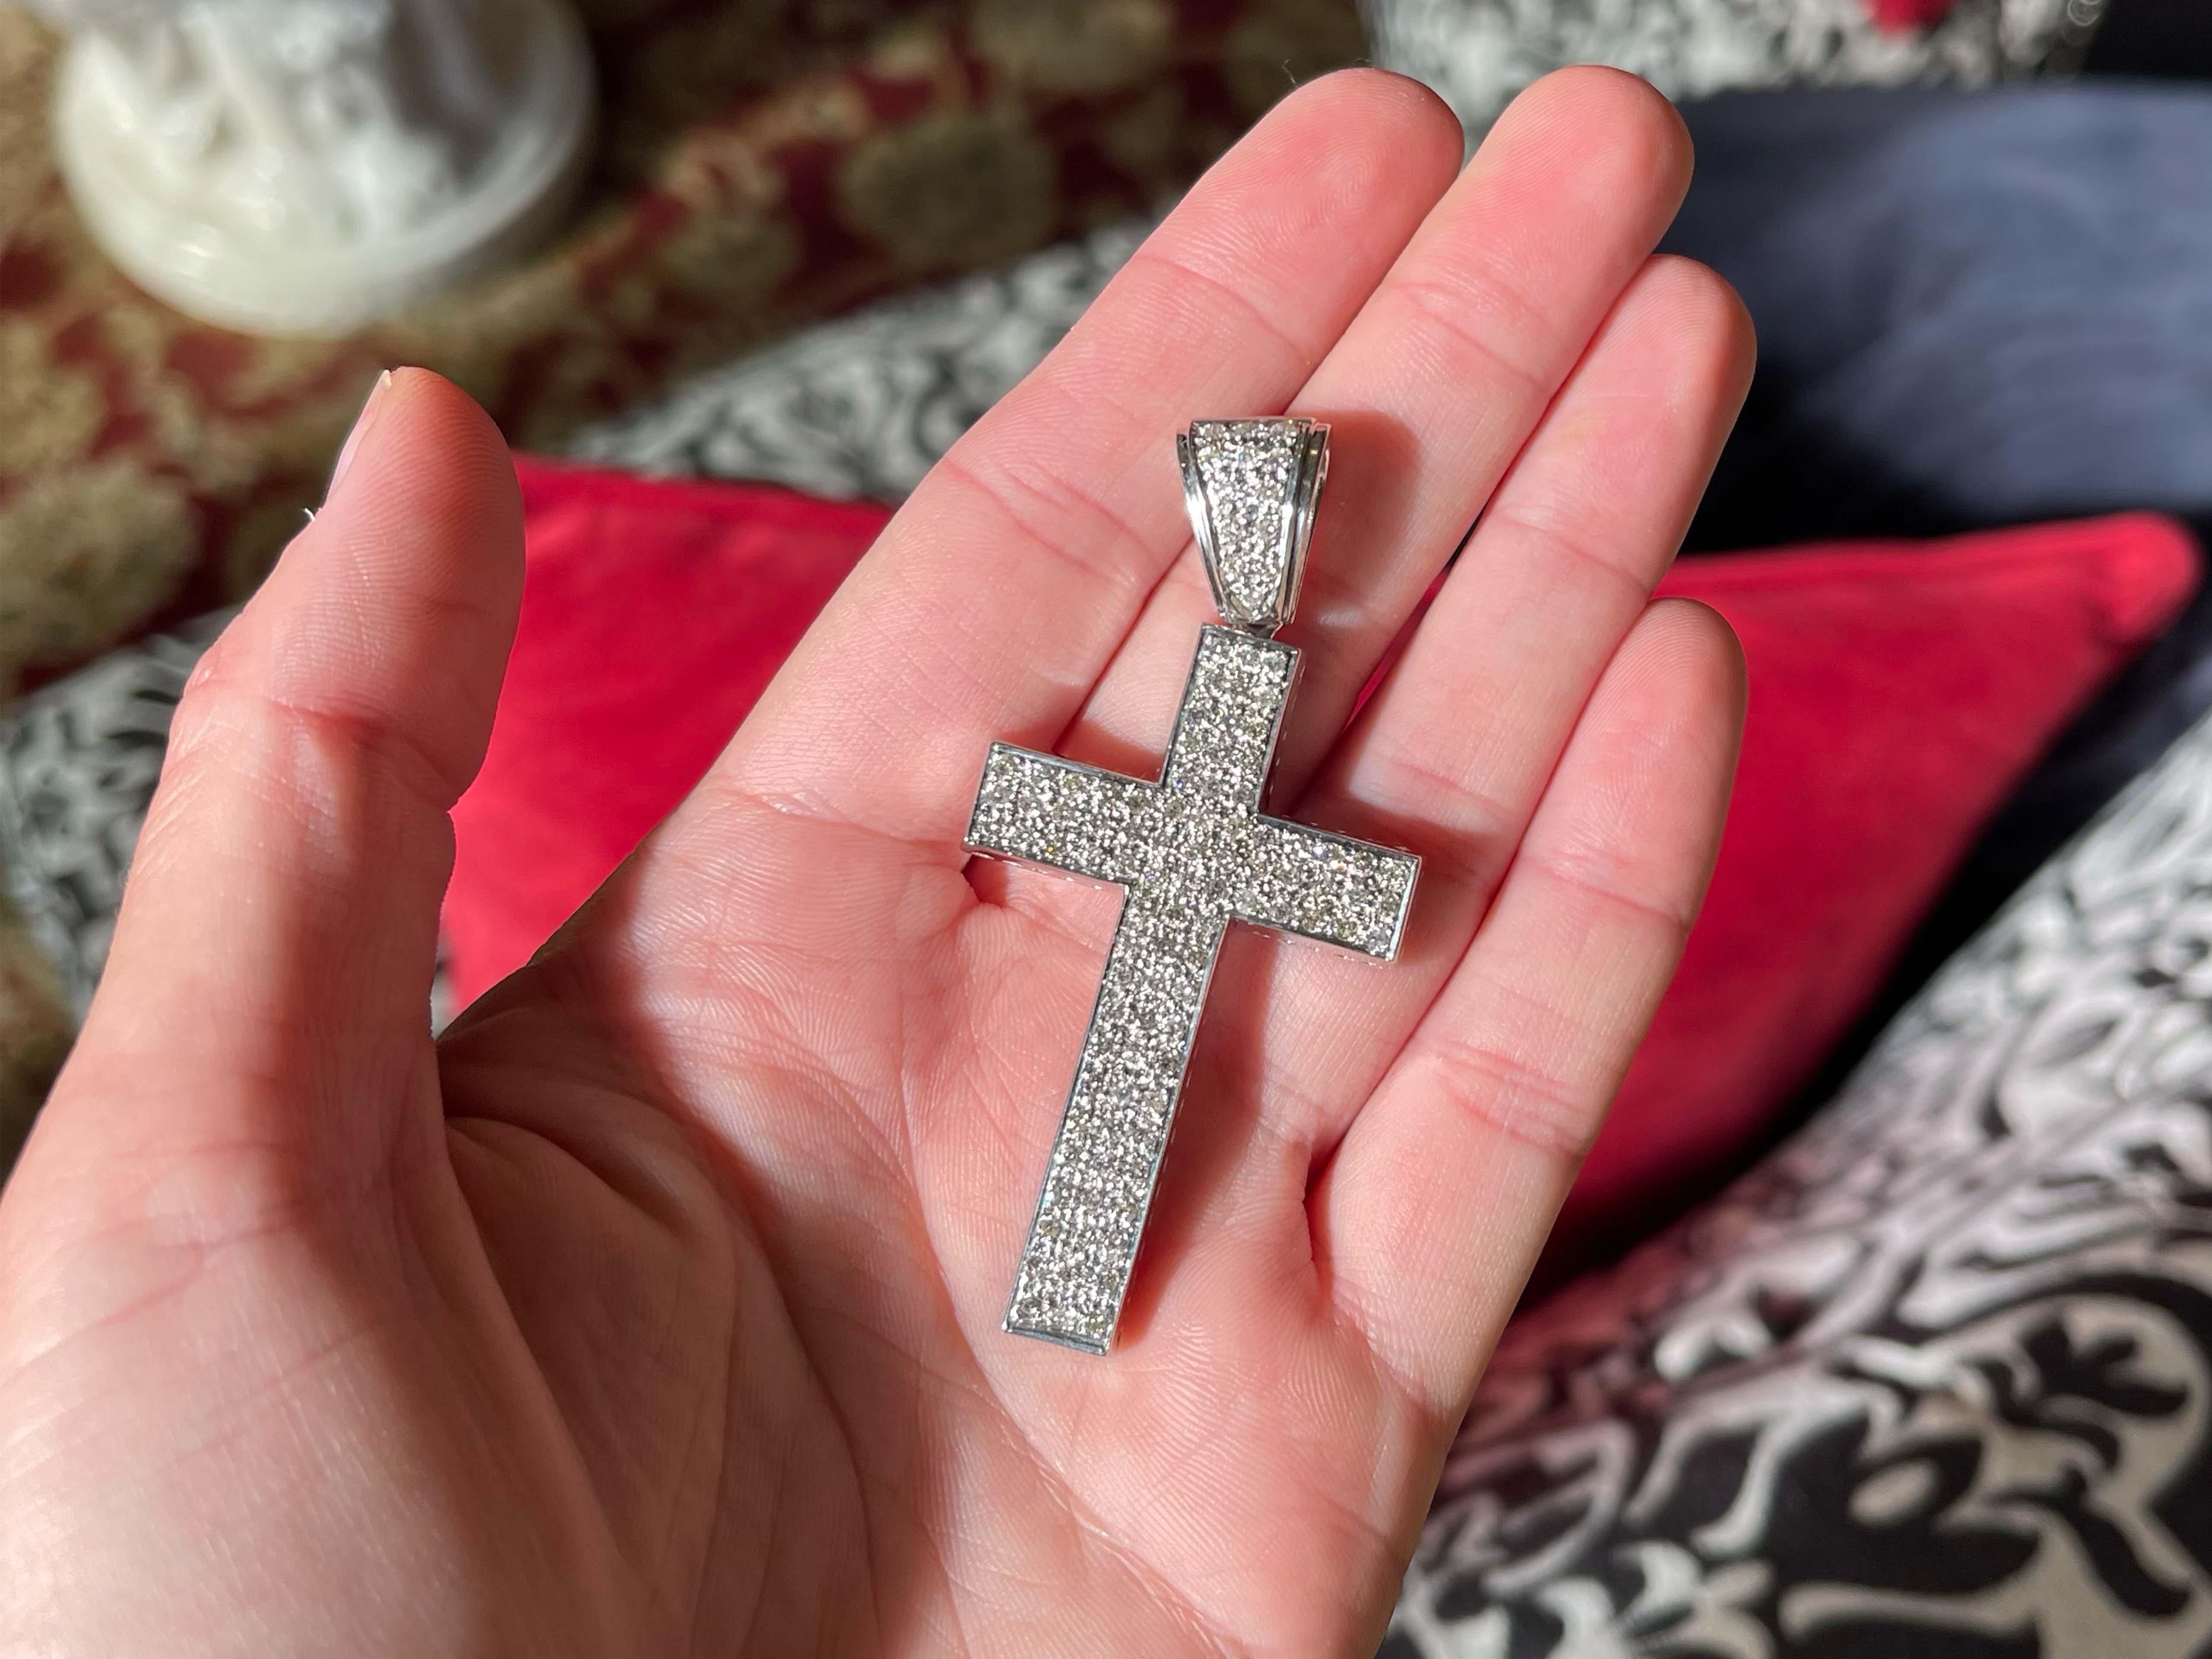 Item Specifications:

Metal: 14K White Gold

Total Weight: 14.3 Grams

Cross and Bail diameter: 2.5